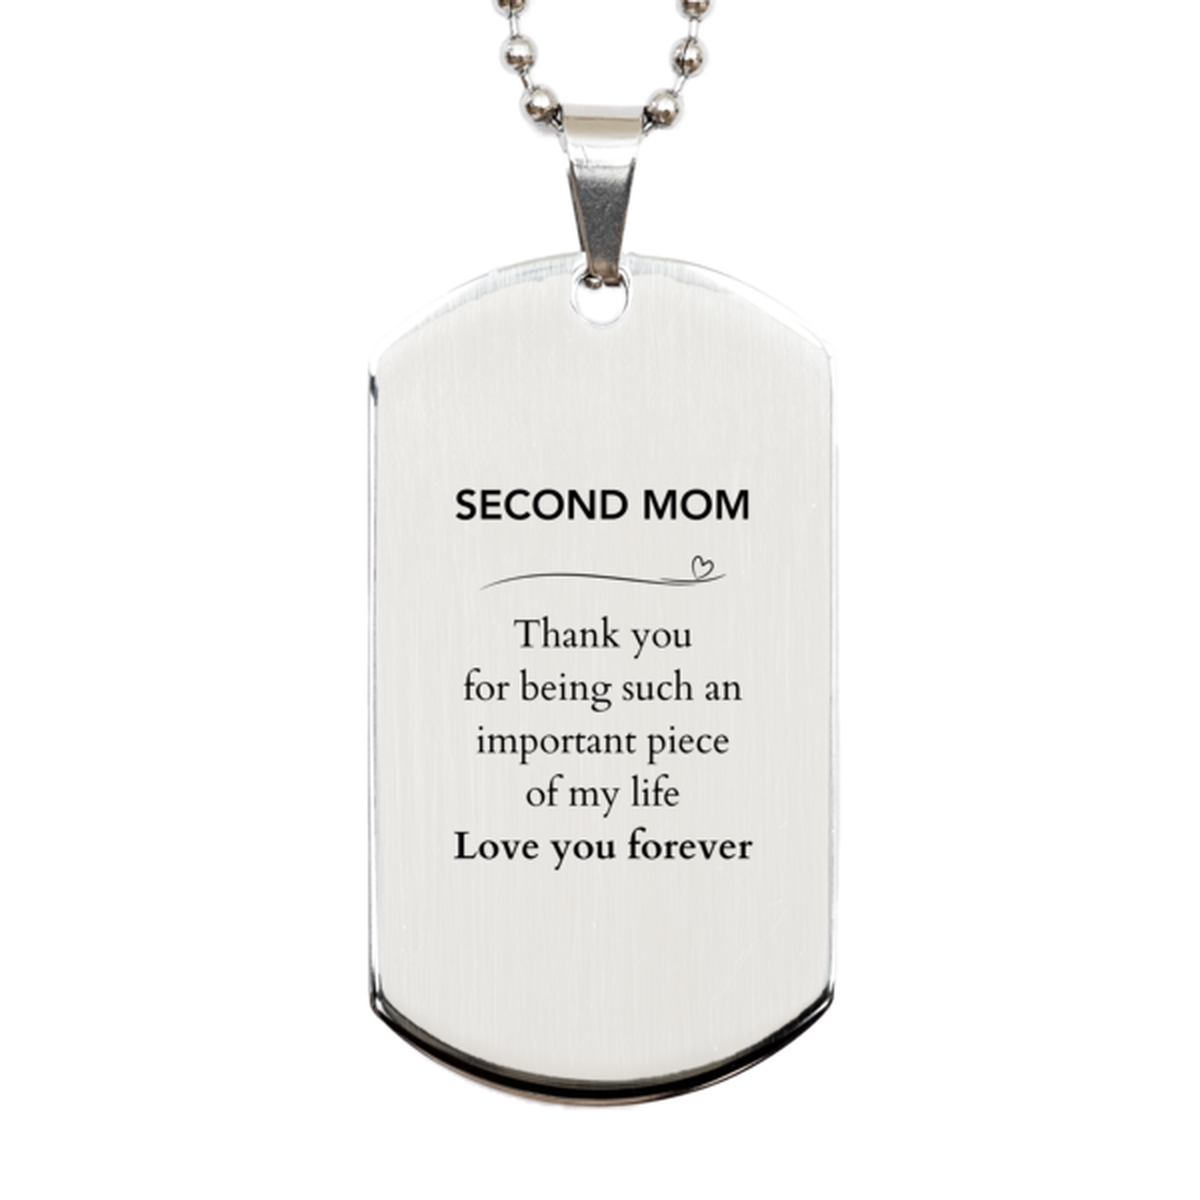 Appropriate Second Mom Silver Dog Tag Epic Birthday Gifts for Second Mom Thank you for being such an important piece of my life Second Mom Christmas Mothers Fathers Day